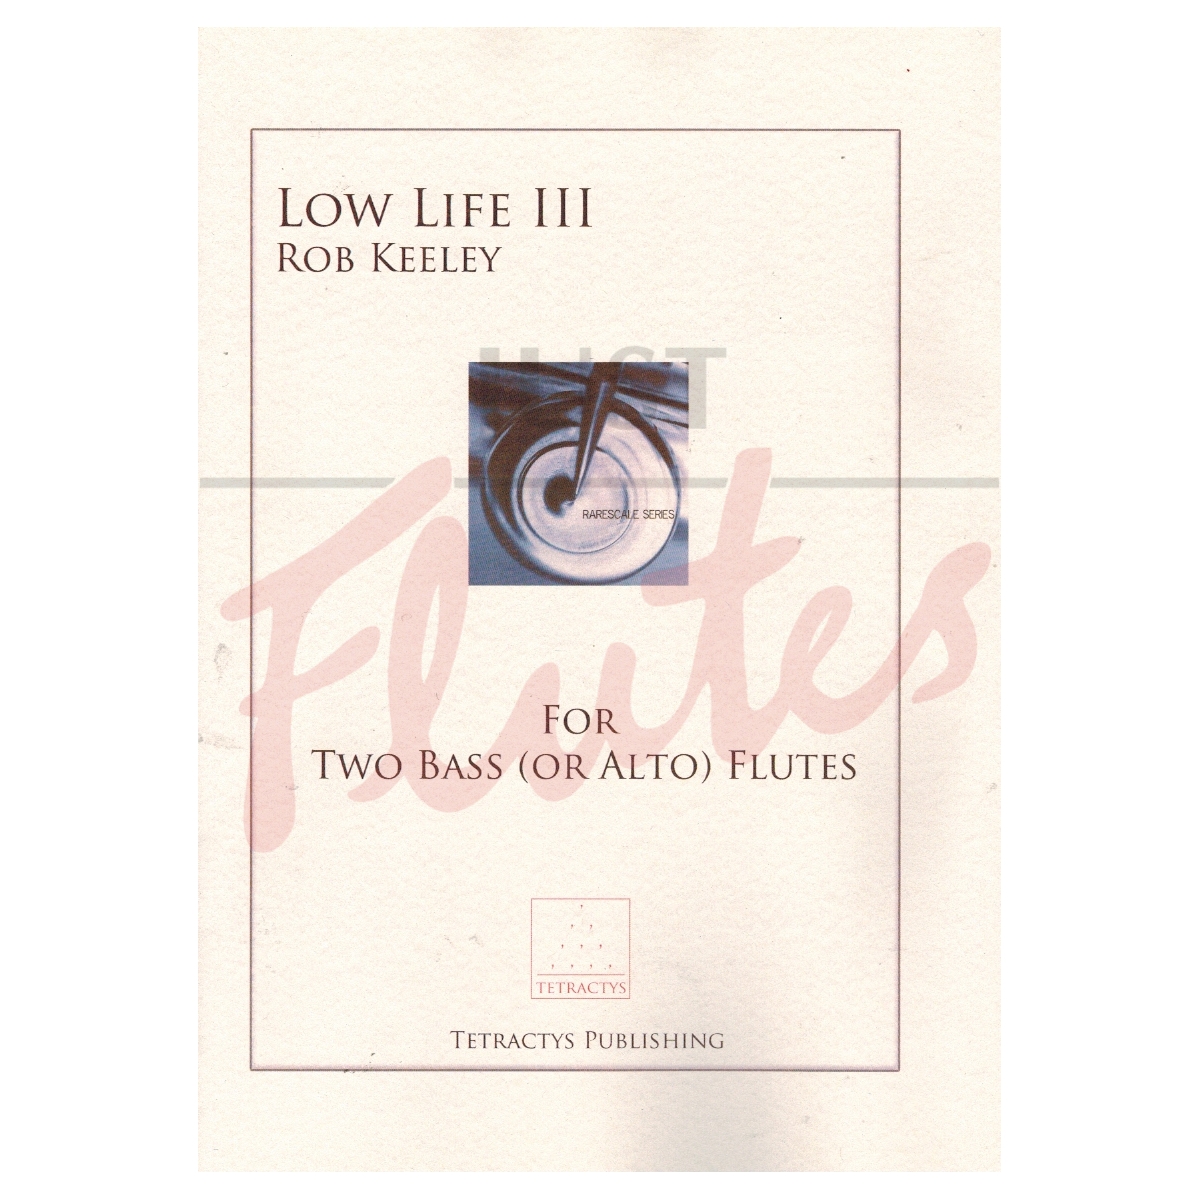 Low Life III for 2 Bass (or alto) Flutes